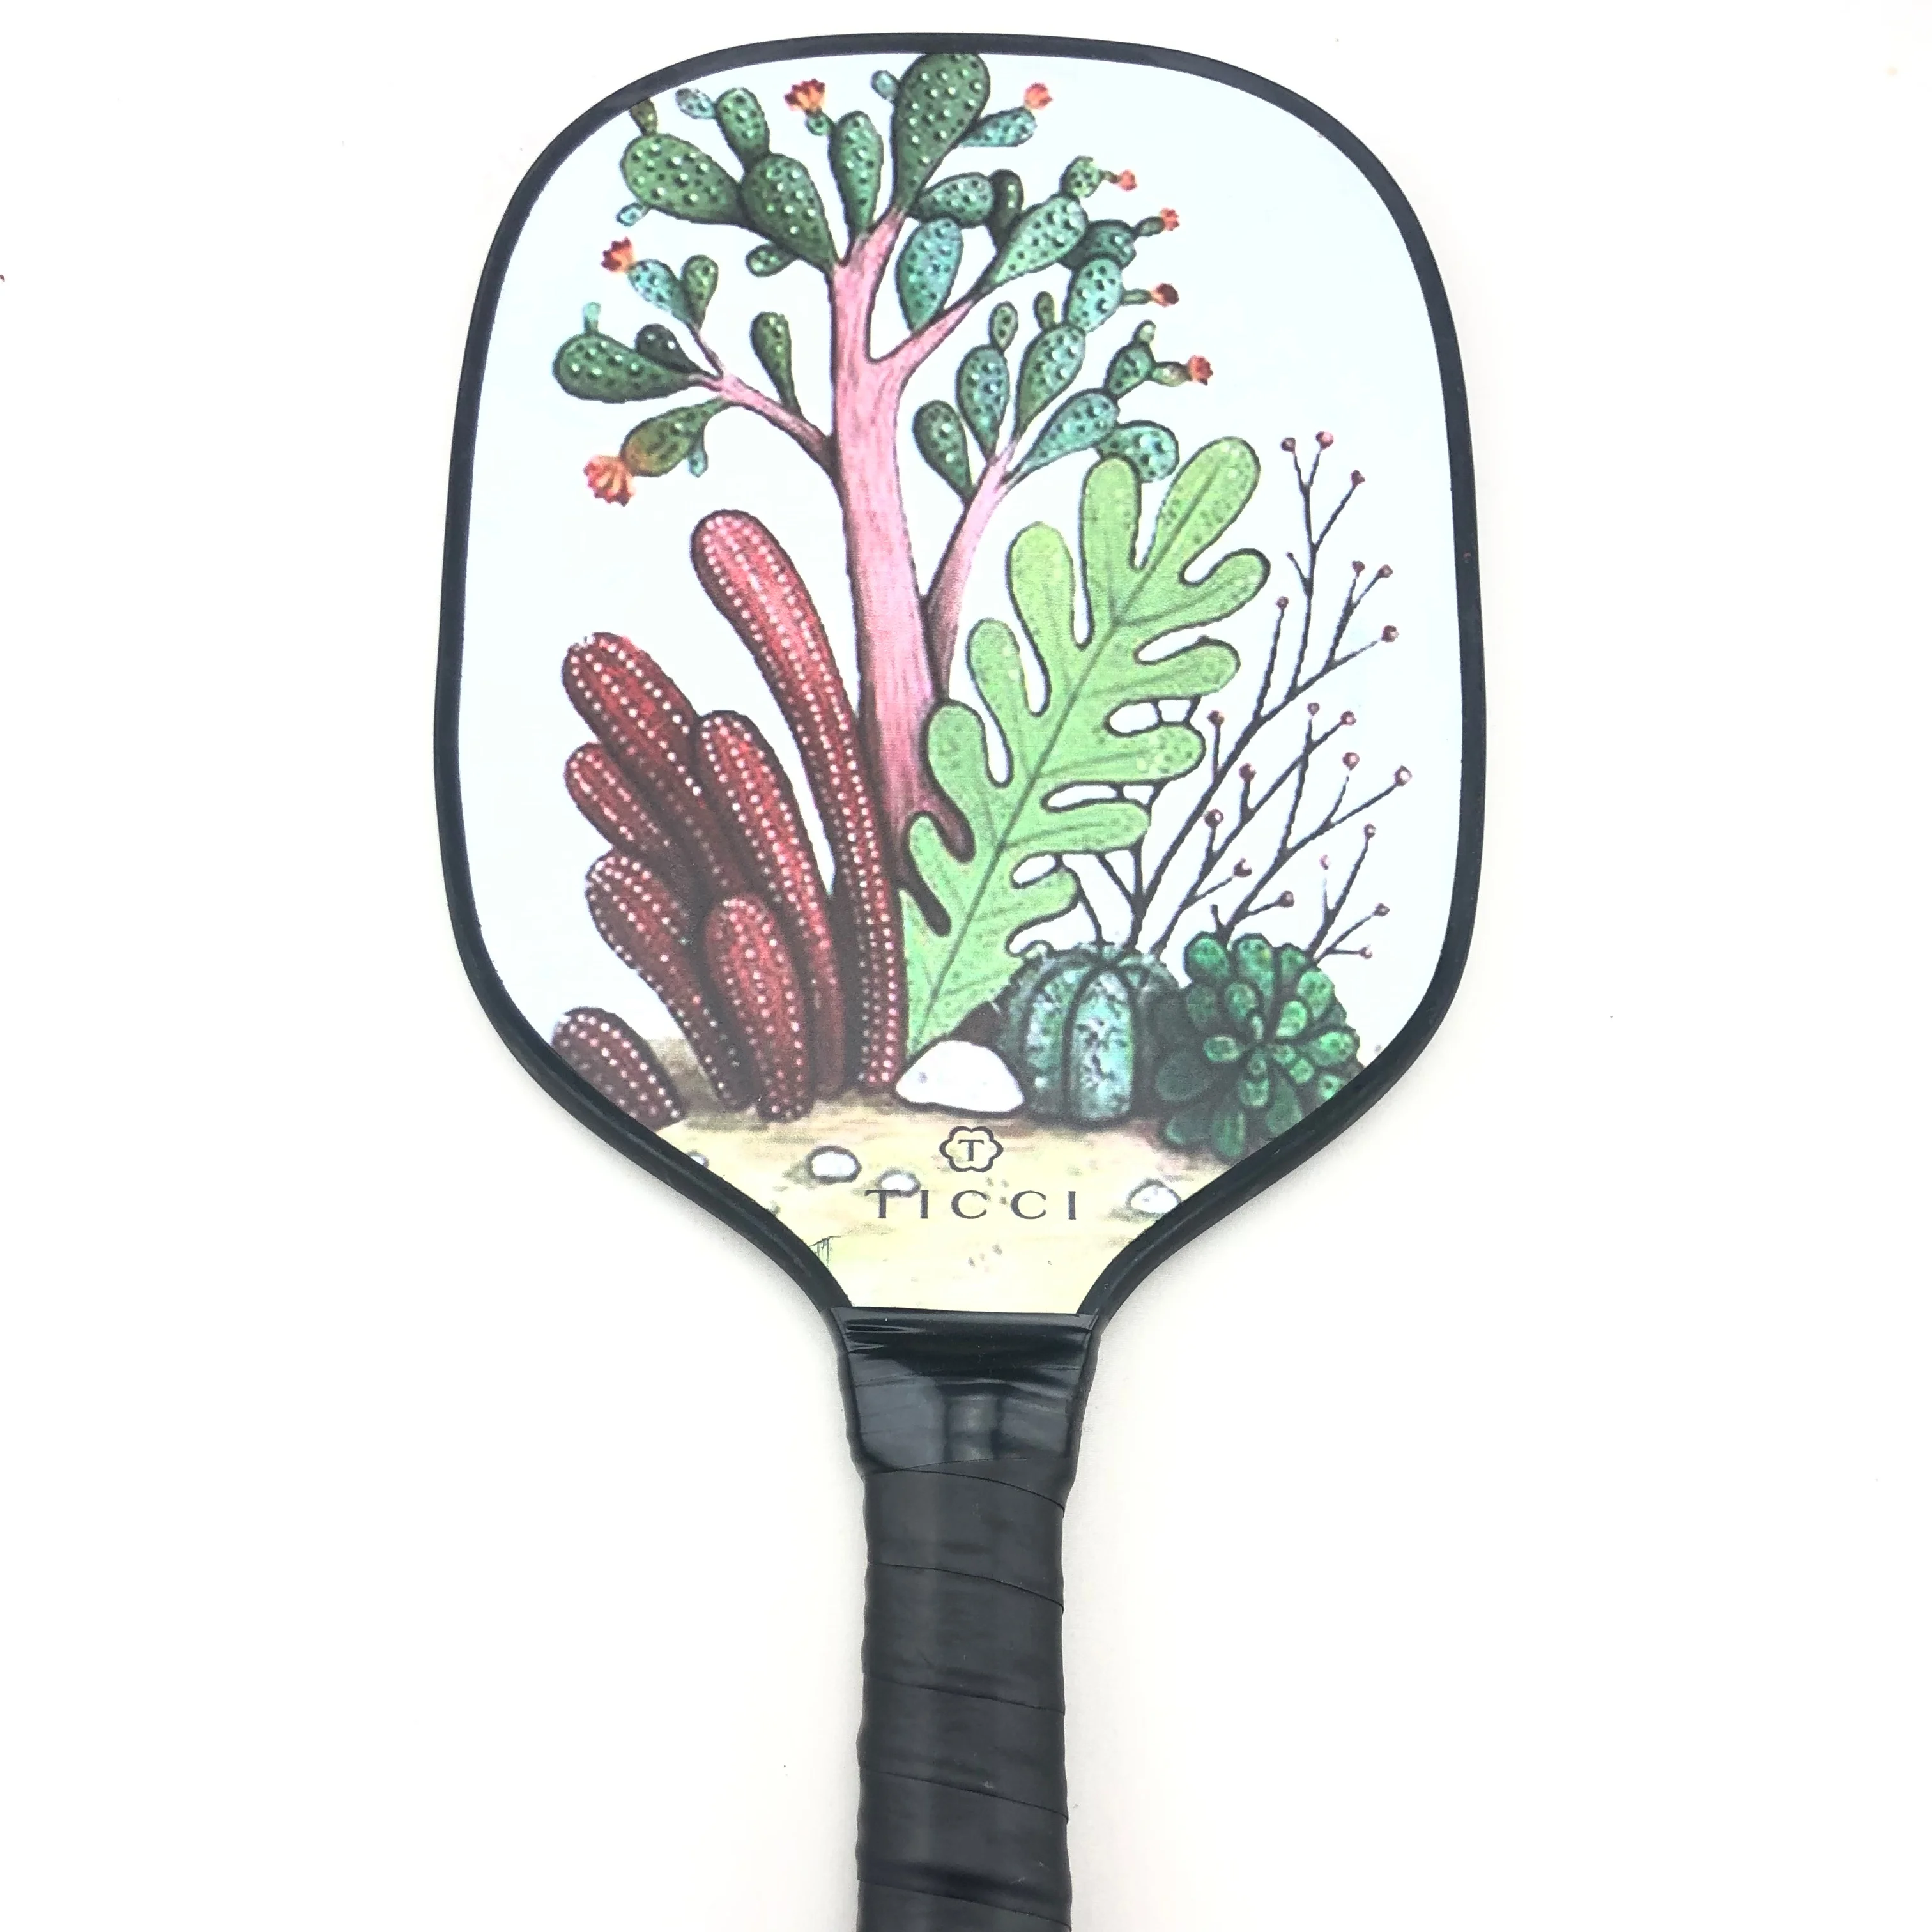 

2019 USAPA Approved High Quality OEM Pickleball Paddle Graphite, Customized